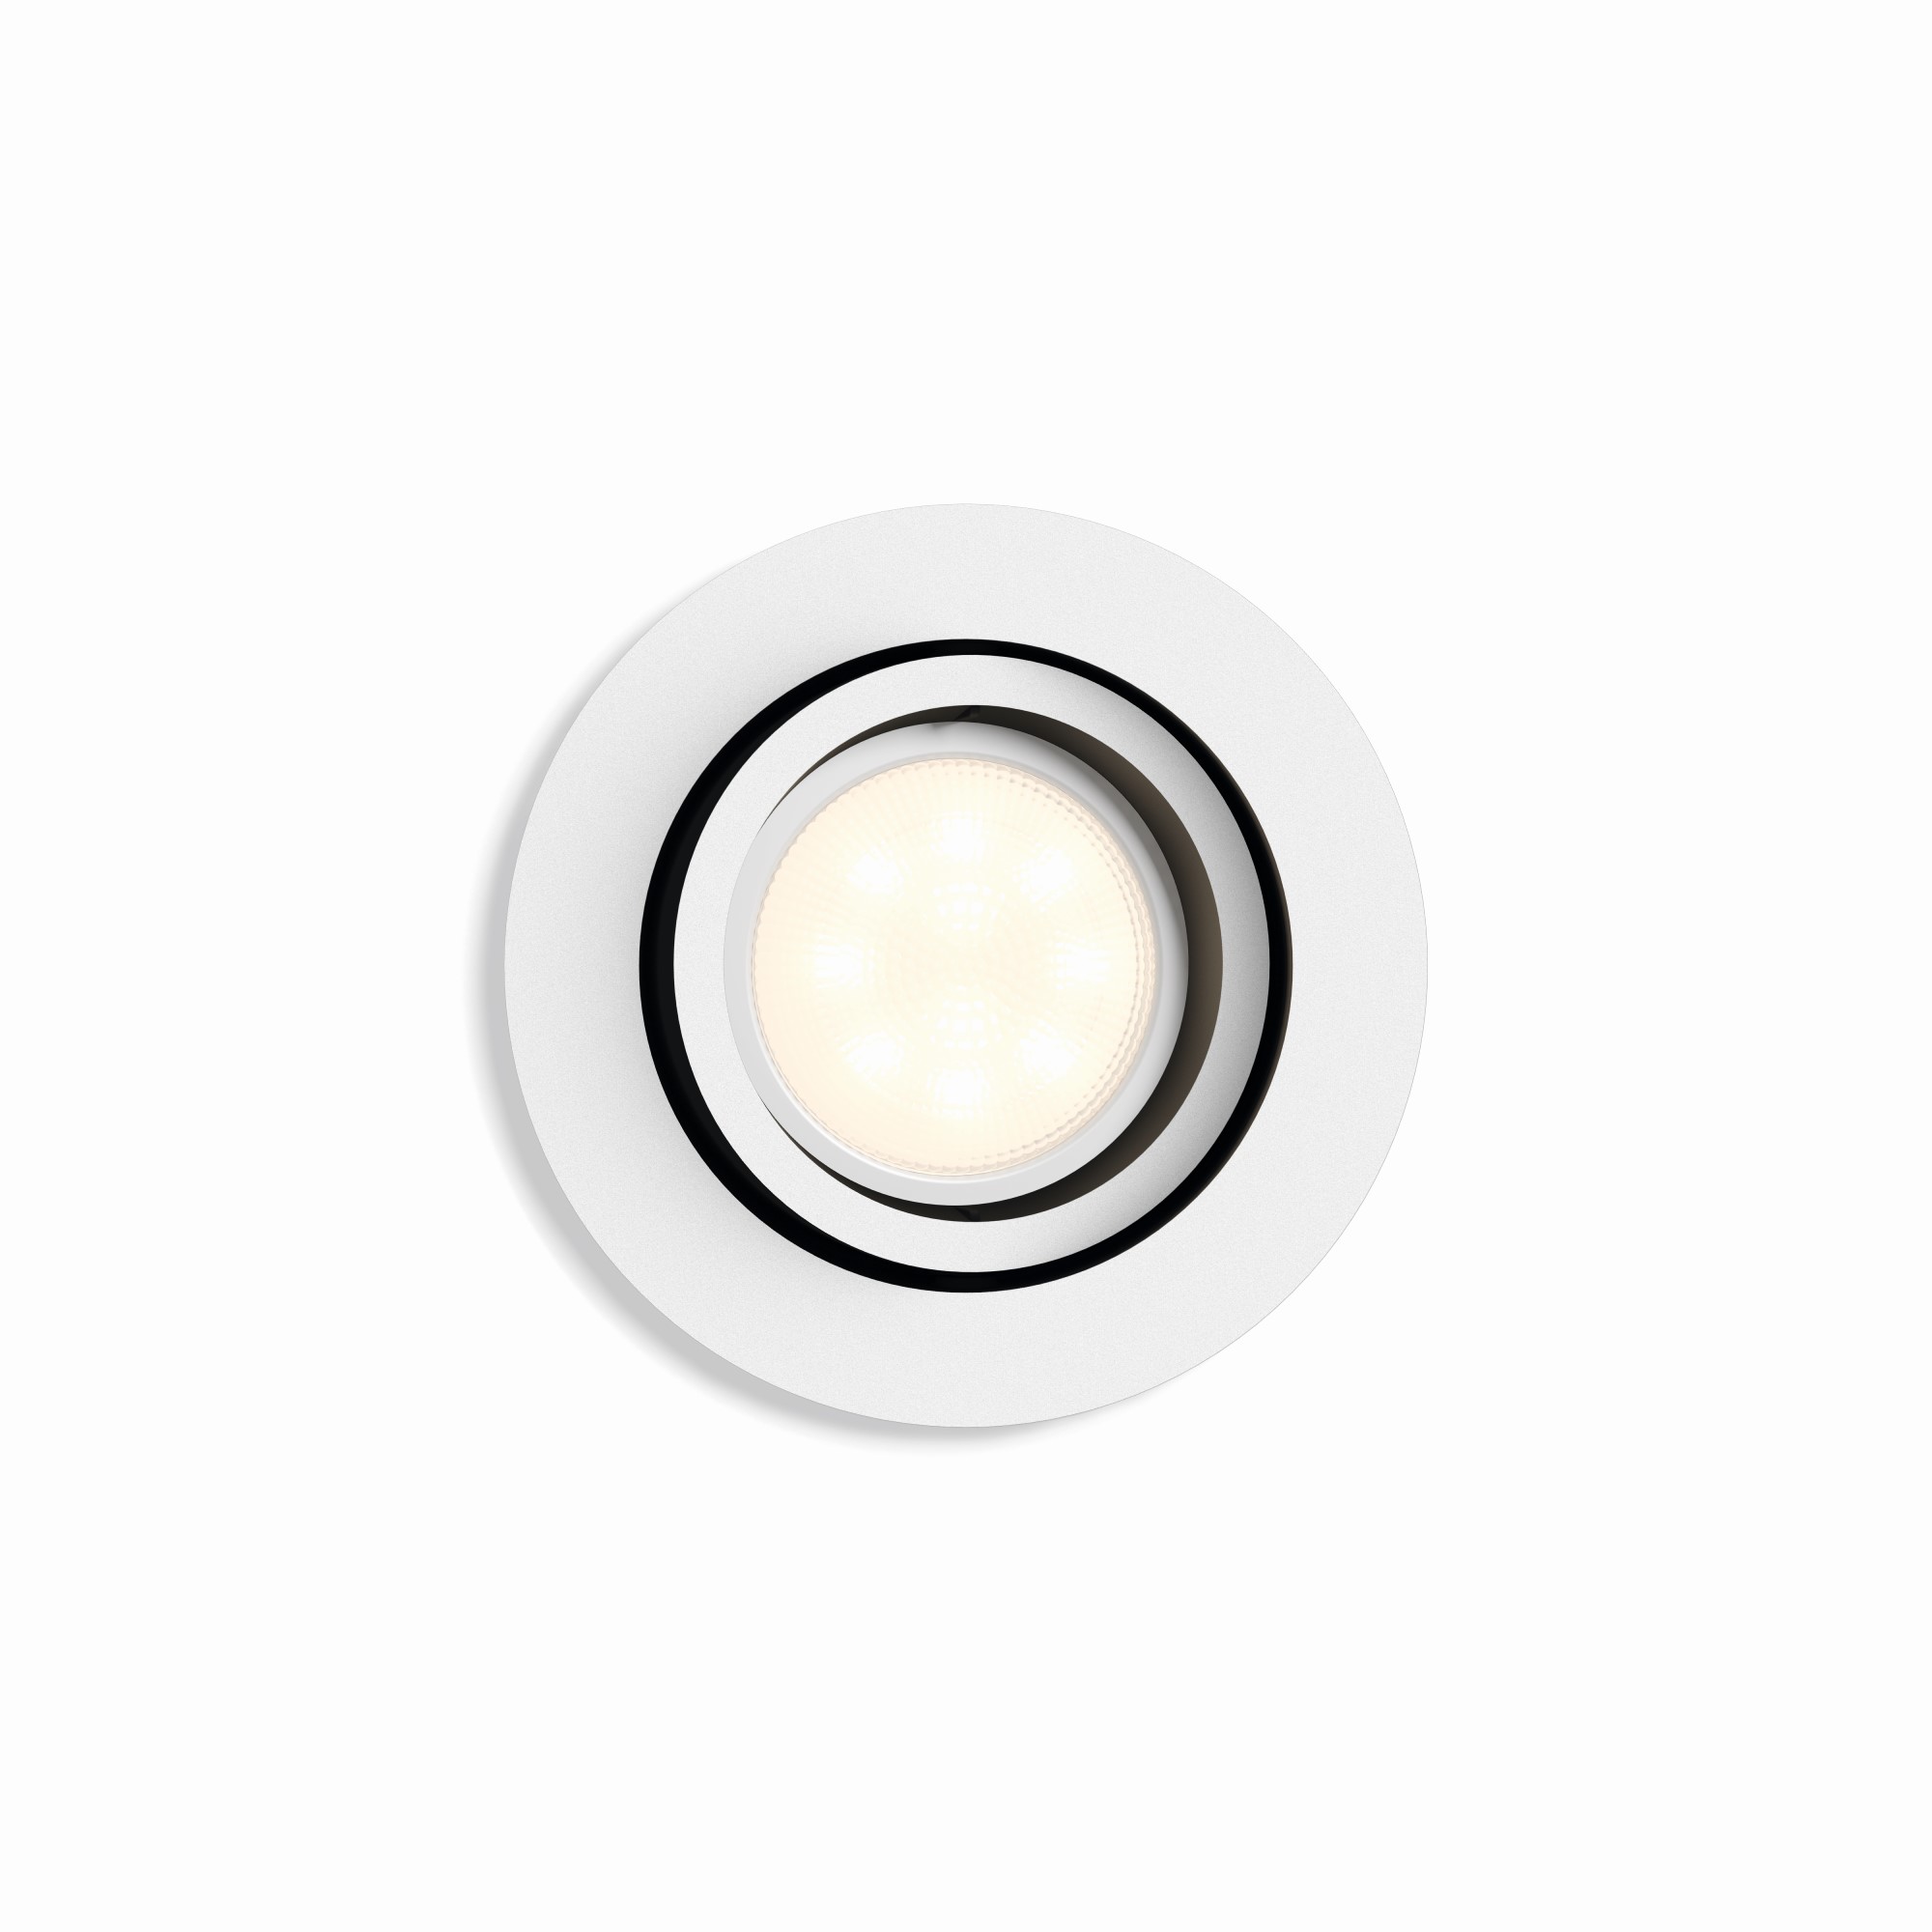 Philips Hue White Ambiance Milliskin LED Downlight round, white, 250lm, with Dimmer Switch